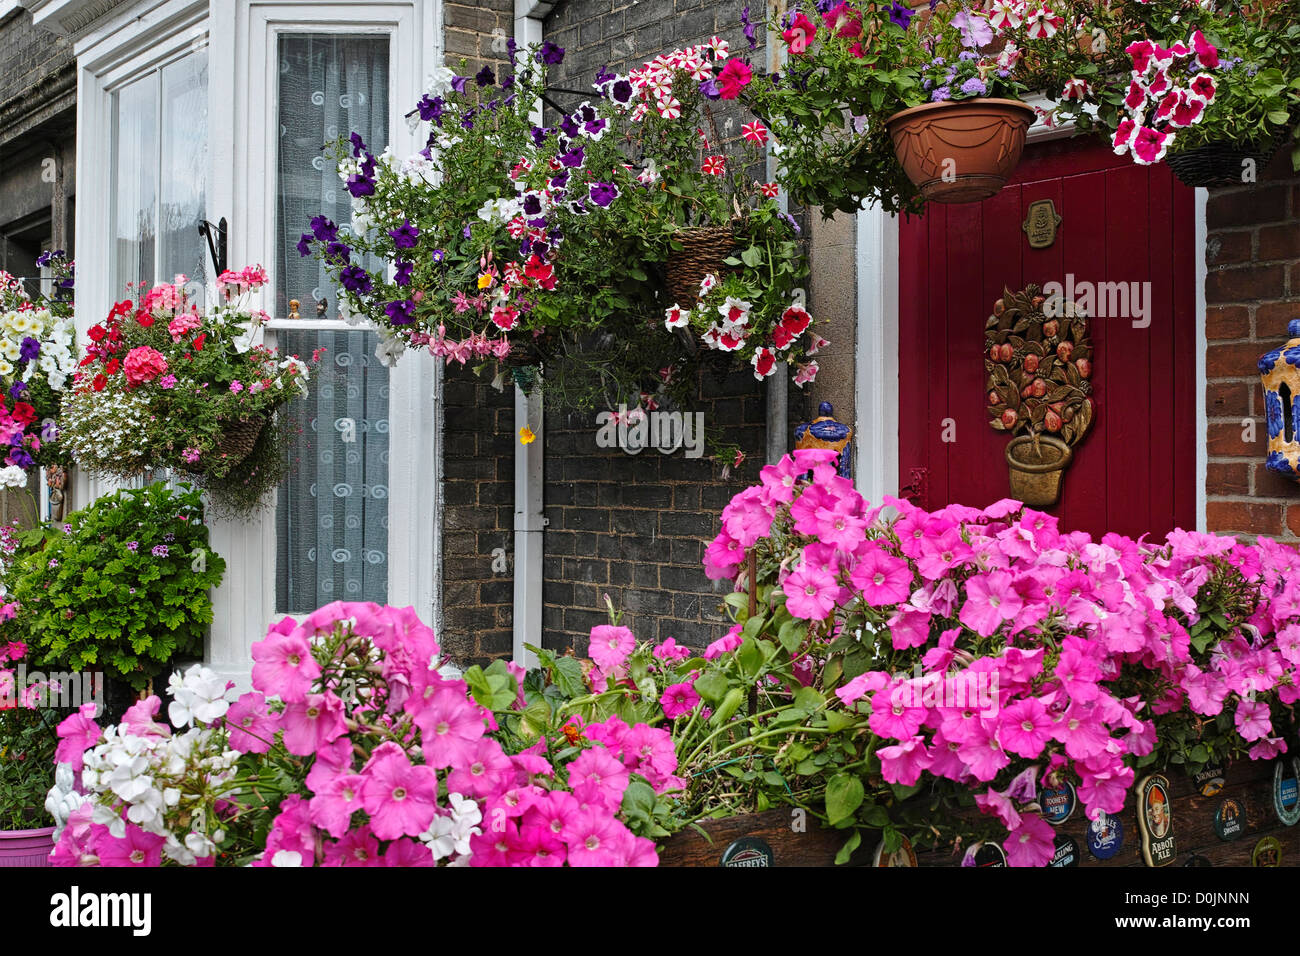 Floral display in front of a house in Ely. Stock Photo